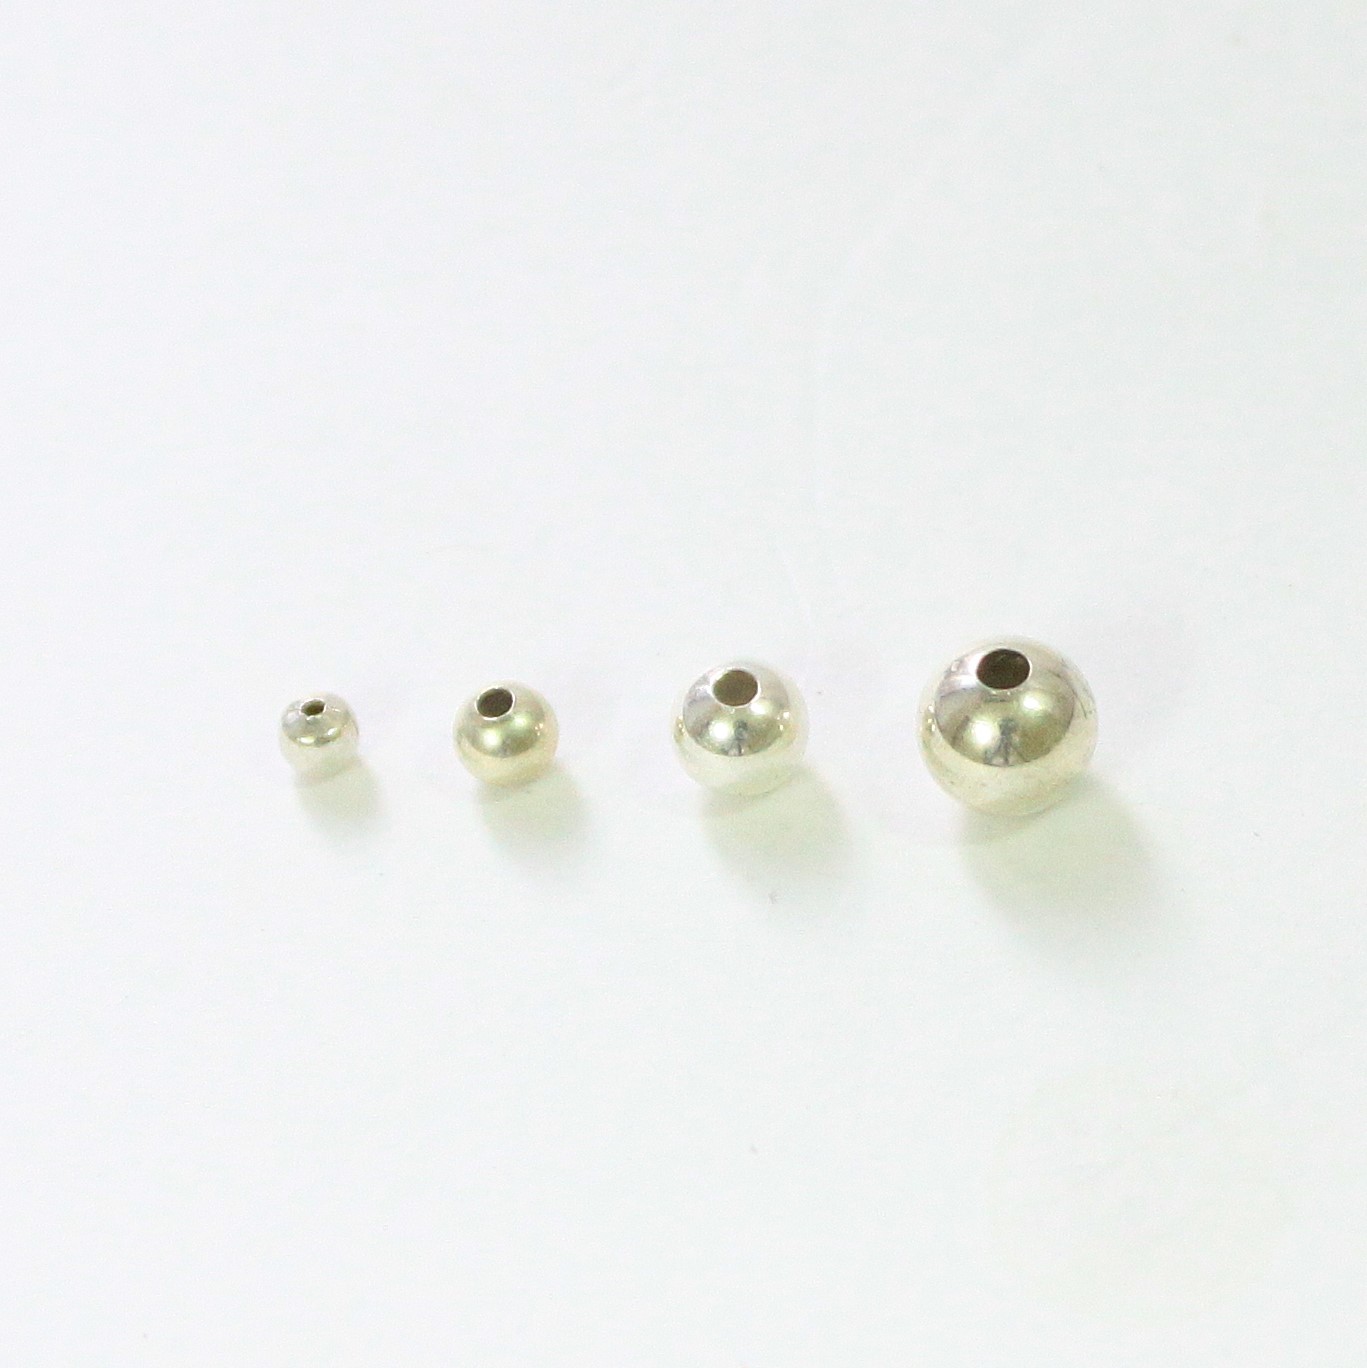 20pcs of 925 Sterling Silver Small Gear Donut Beads for Bracelet Spacers